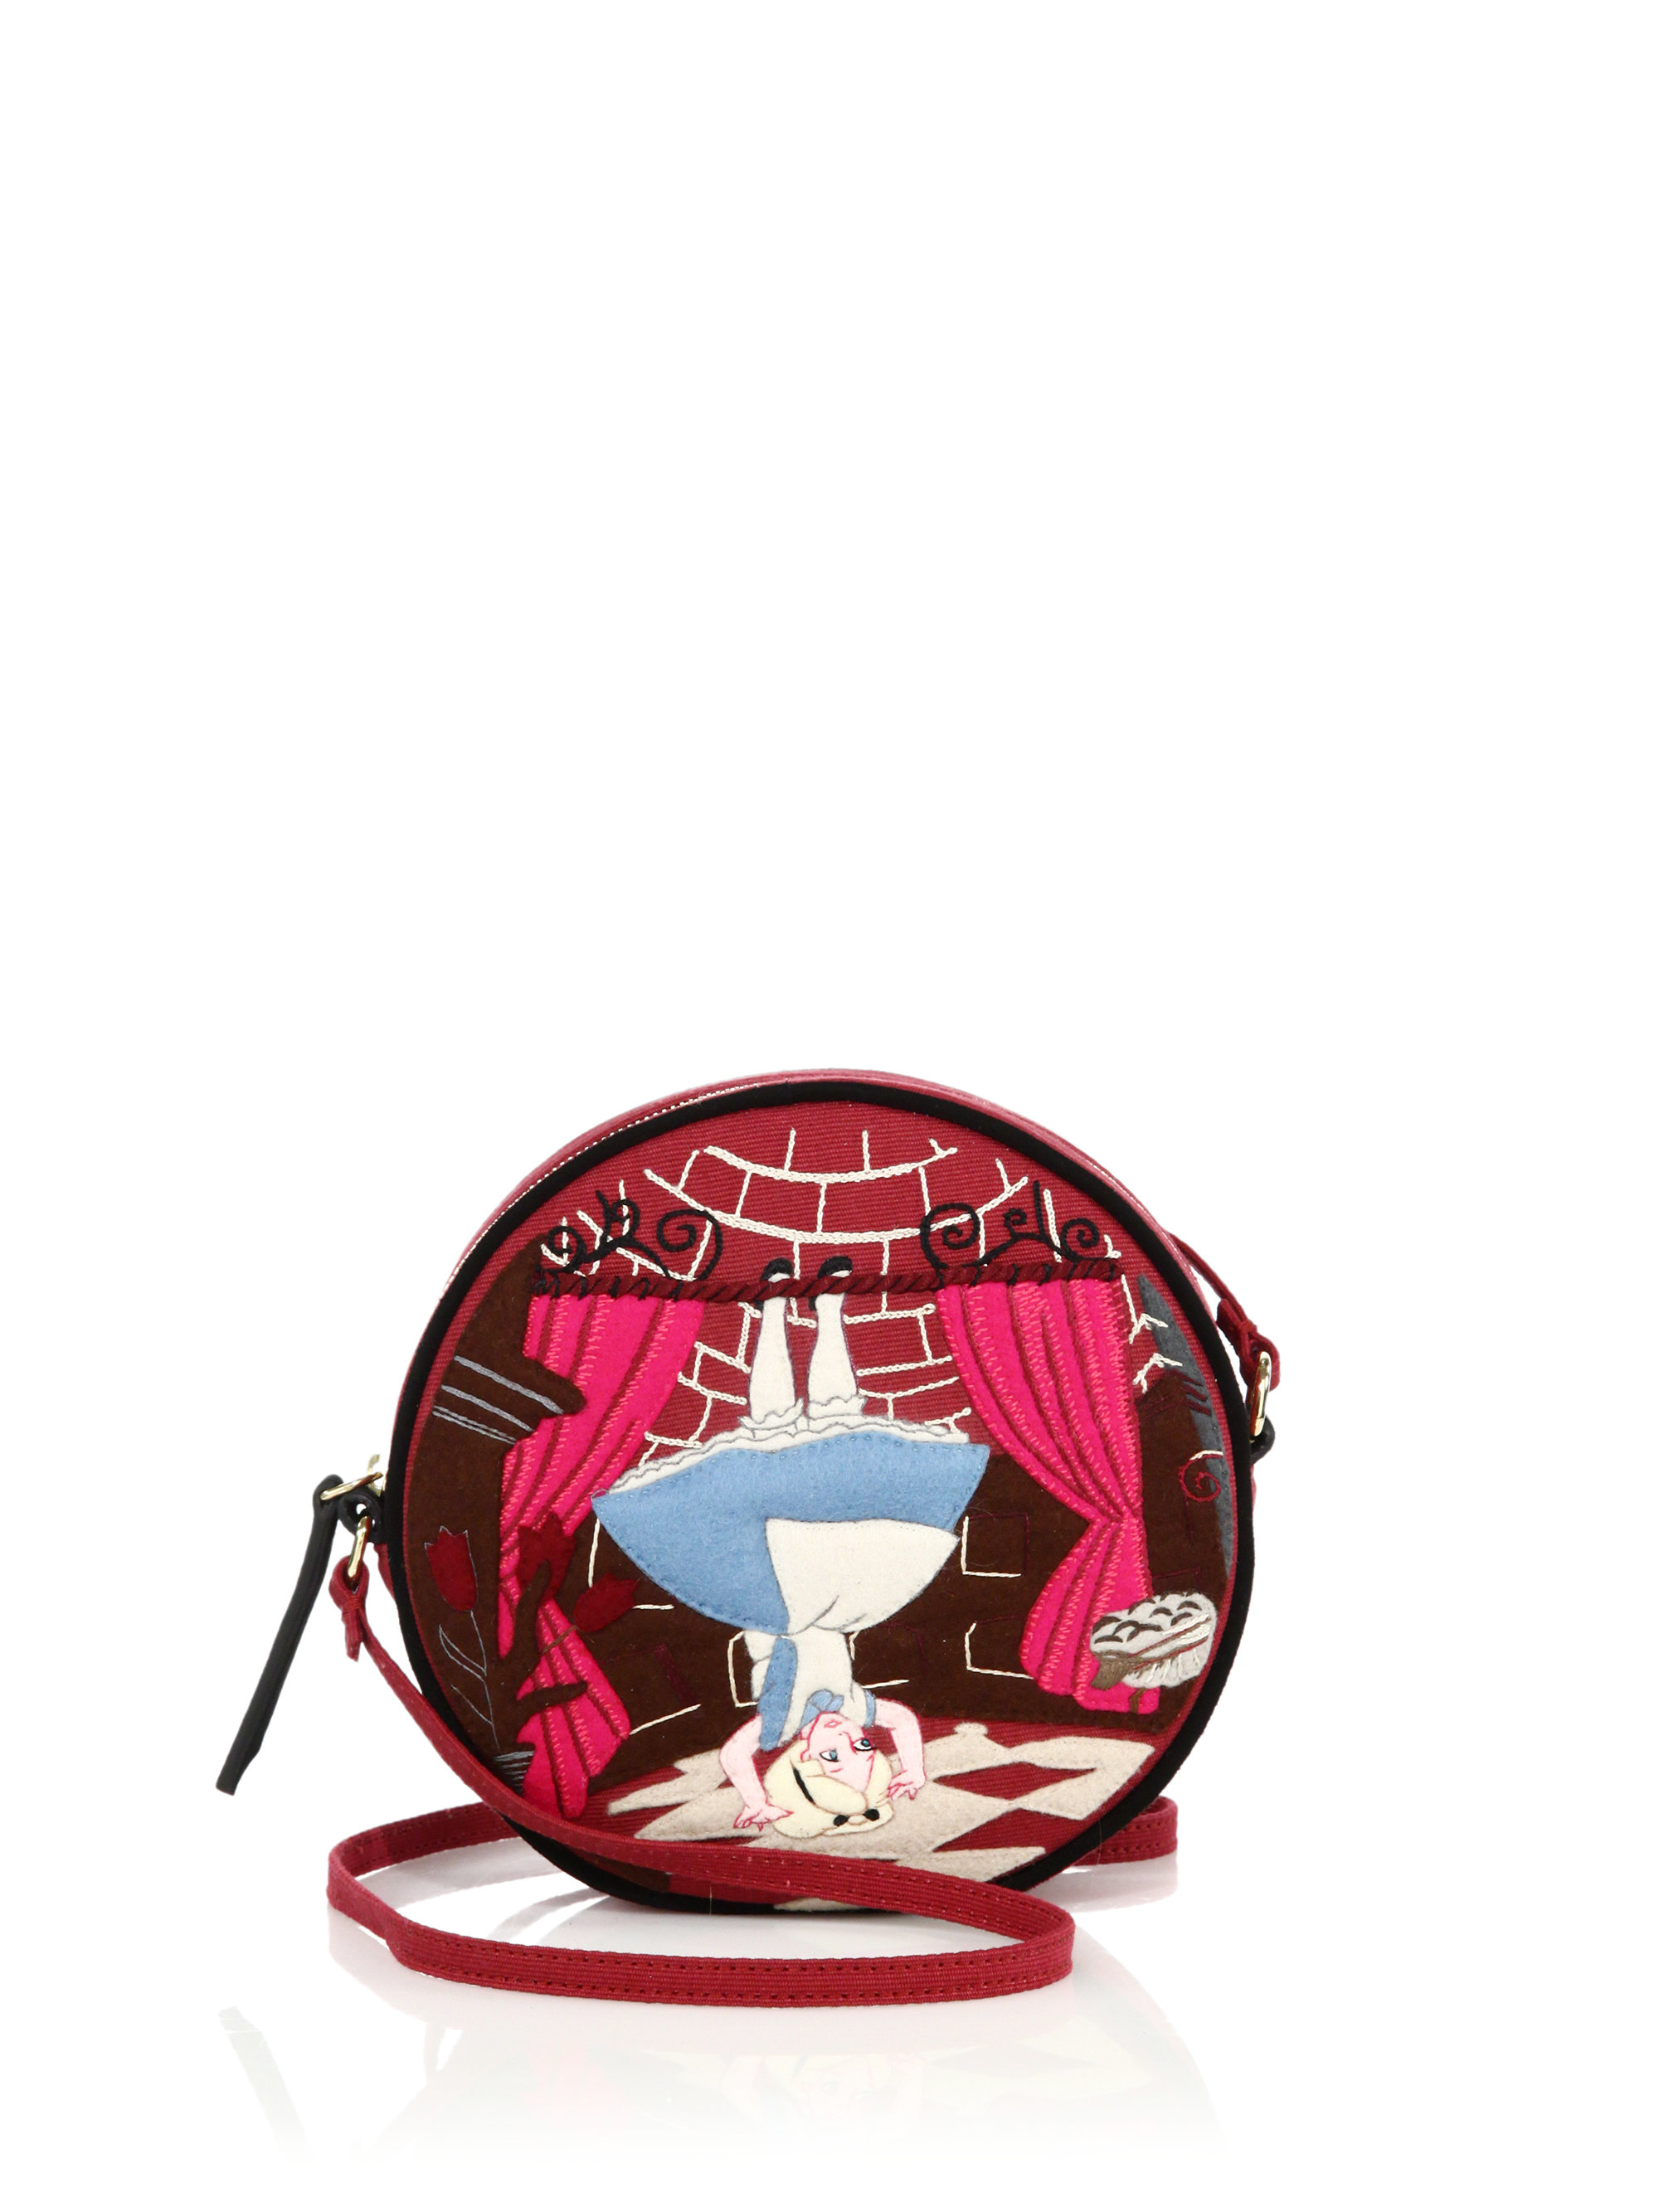 Lyst - Olympia Le-Tan Upside Down Alice Round Cross-Body Bag in Pink